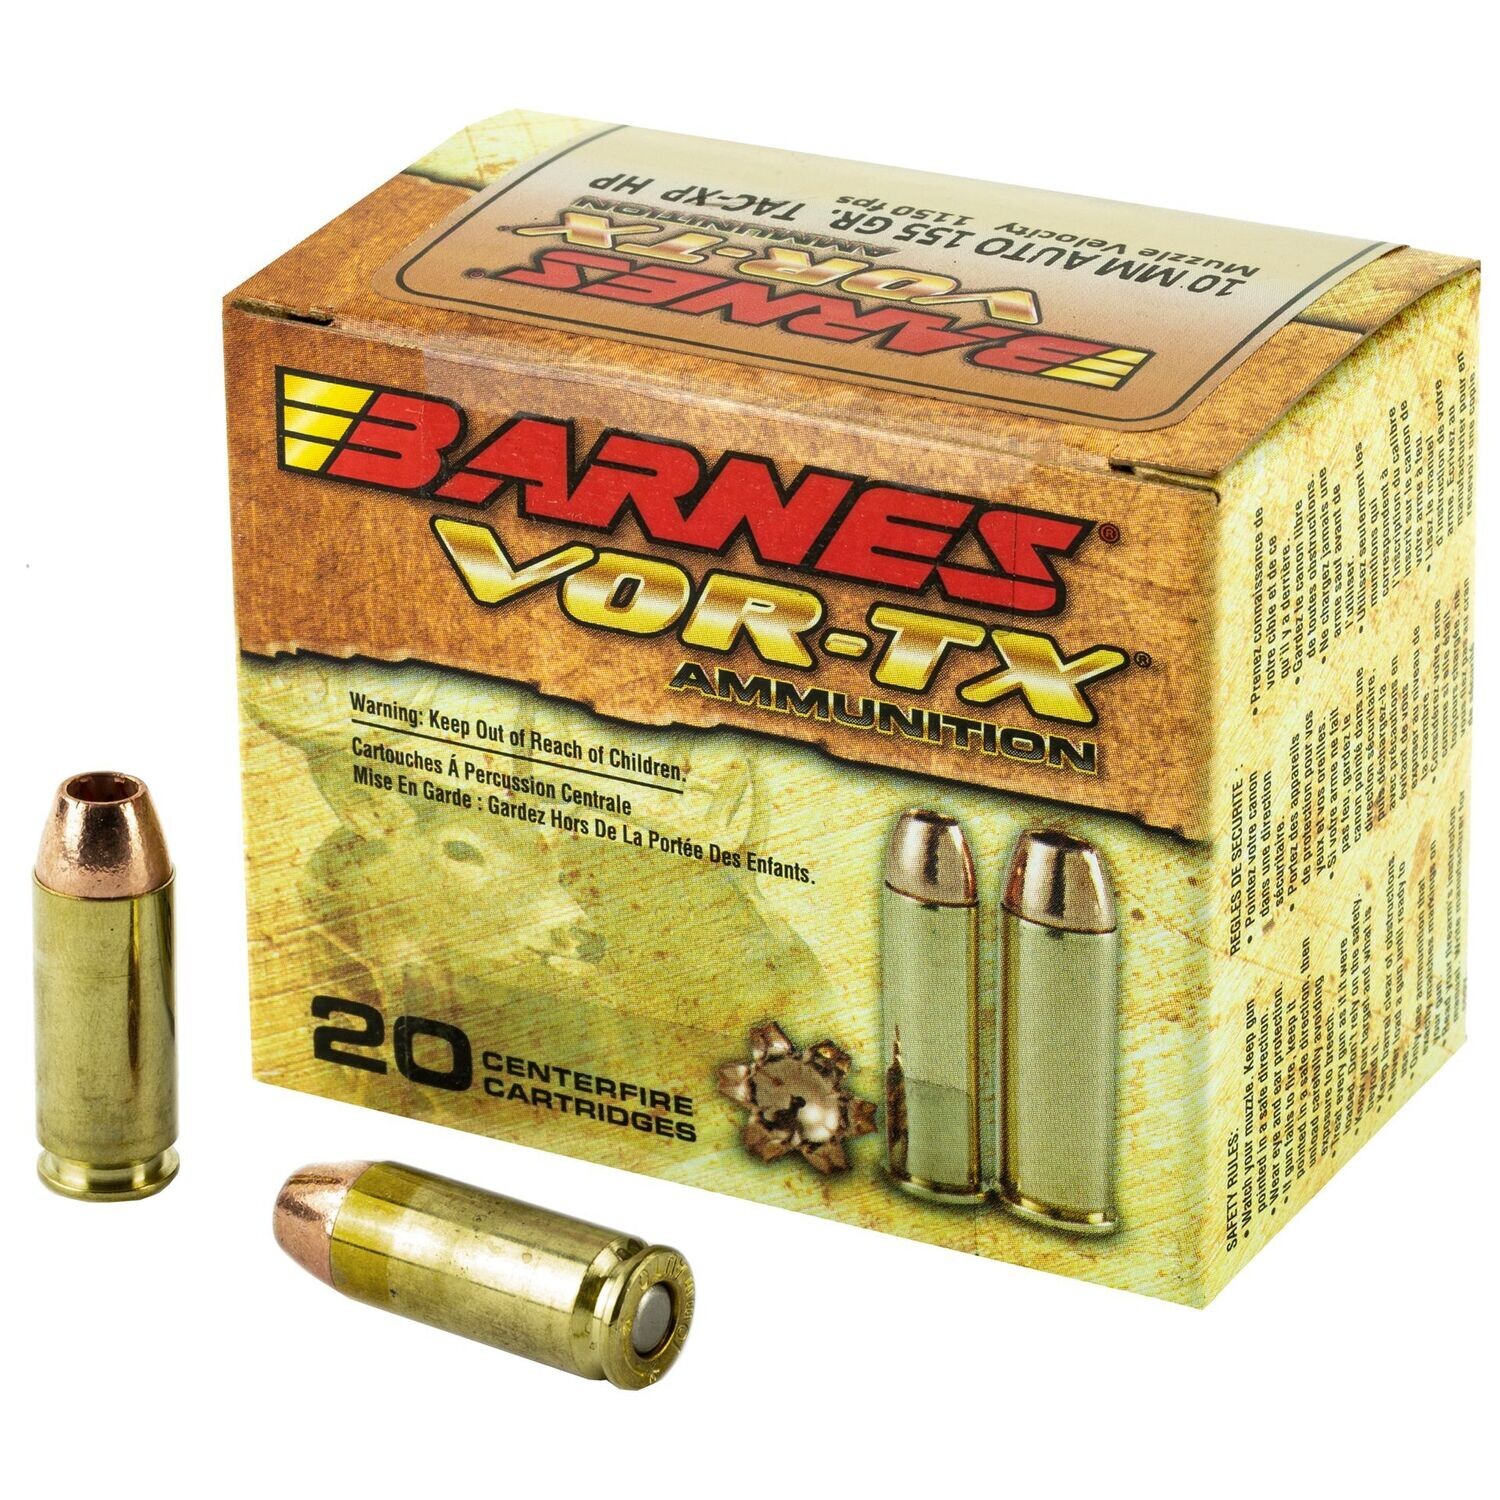 Barnes, VOR-TX, 10MM, 155 Grain, XPB, Jacketed Hollow Point, Lead Free, 20 Round Box, California Certified Nonlead Ammunition